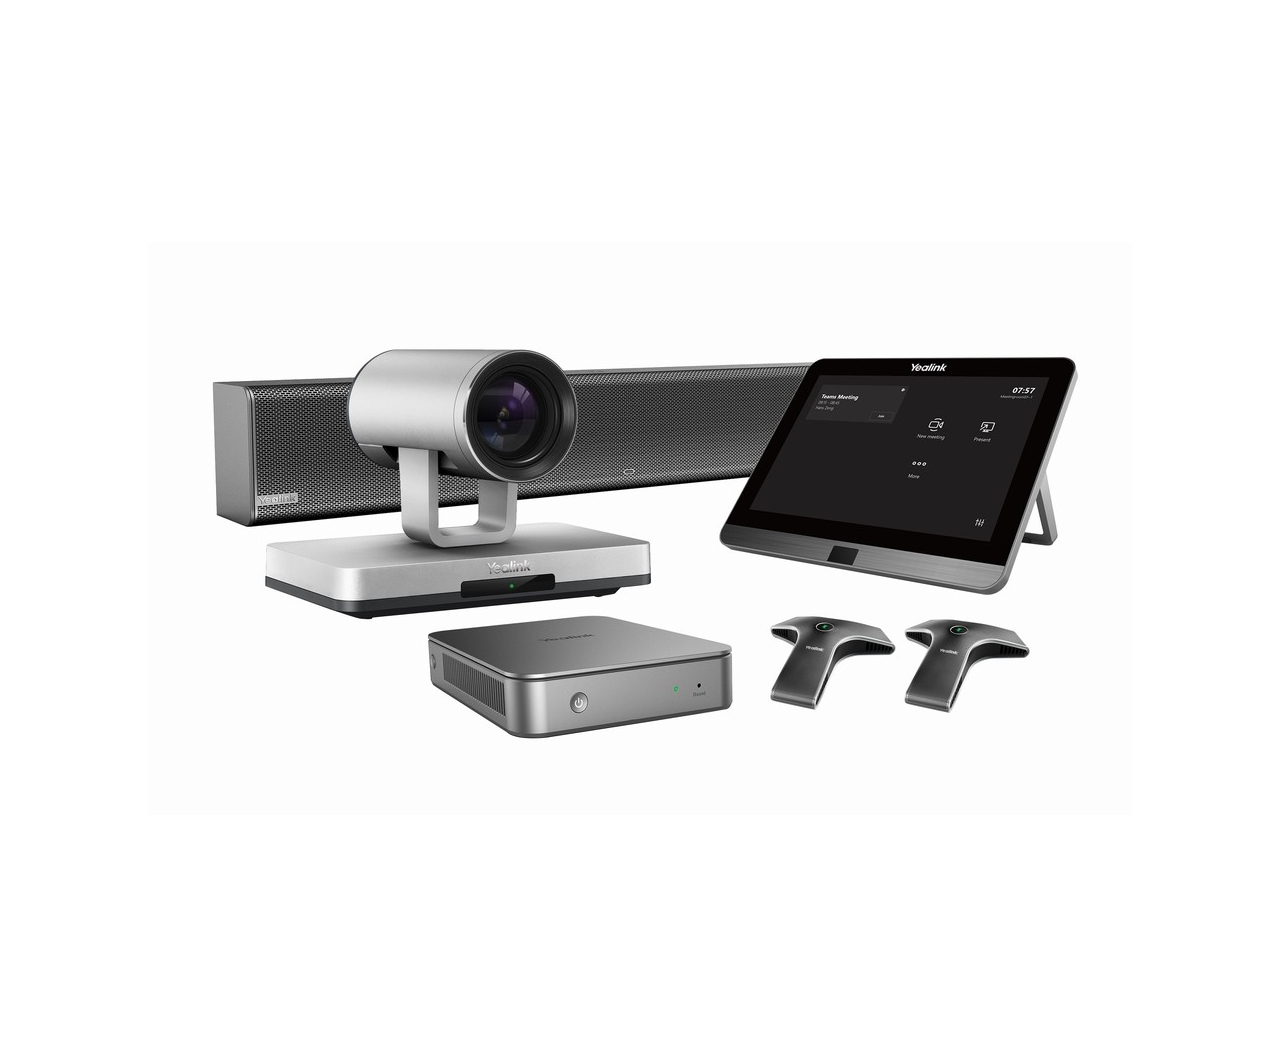 YEALINK VIDEO CONFERENCING SYSTEM MVC800 II-C2-211-0